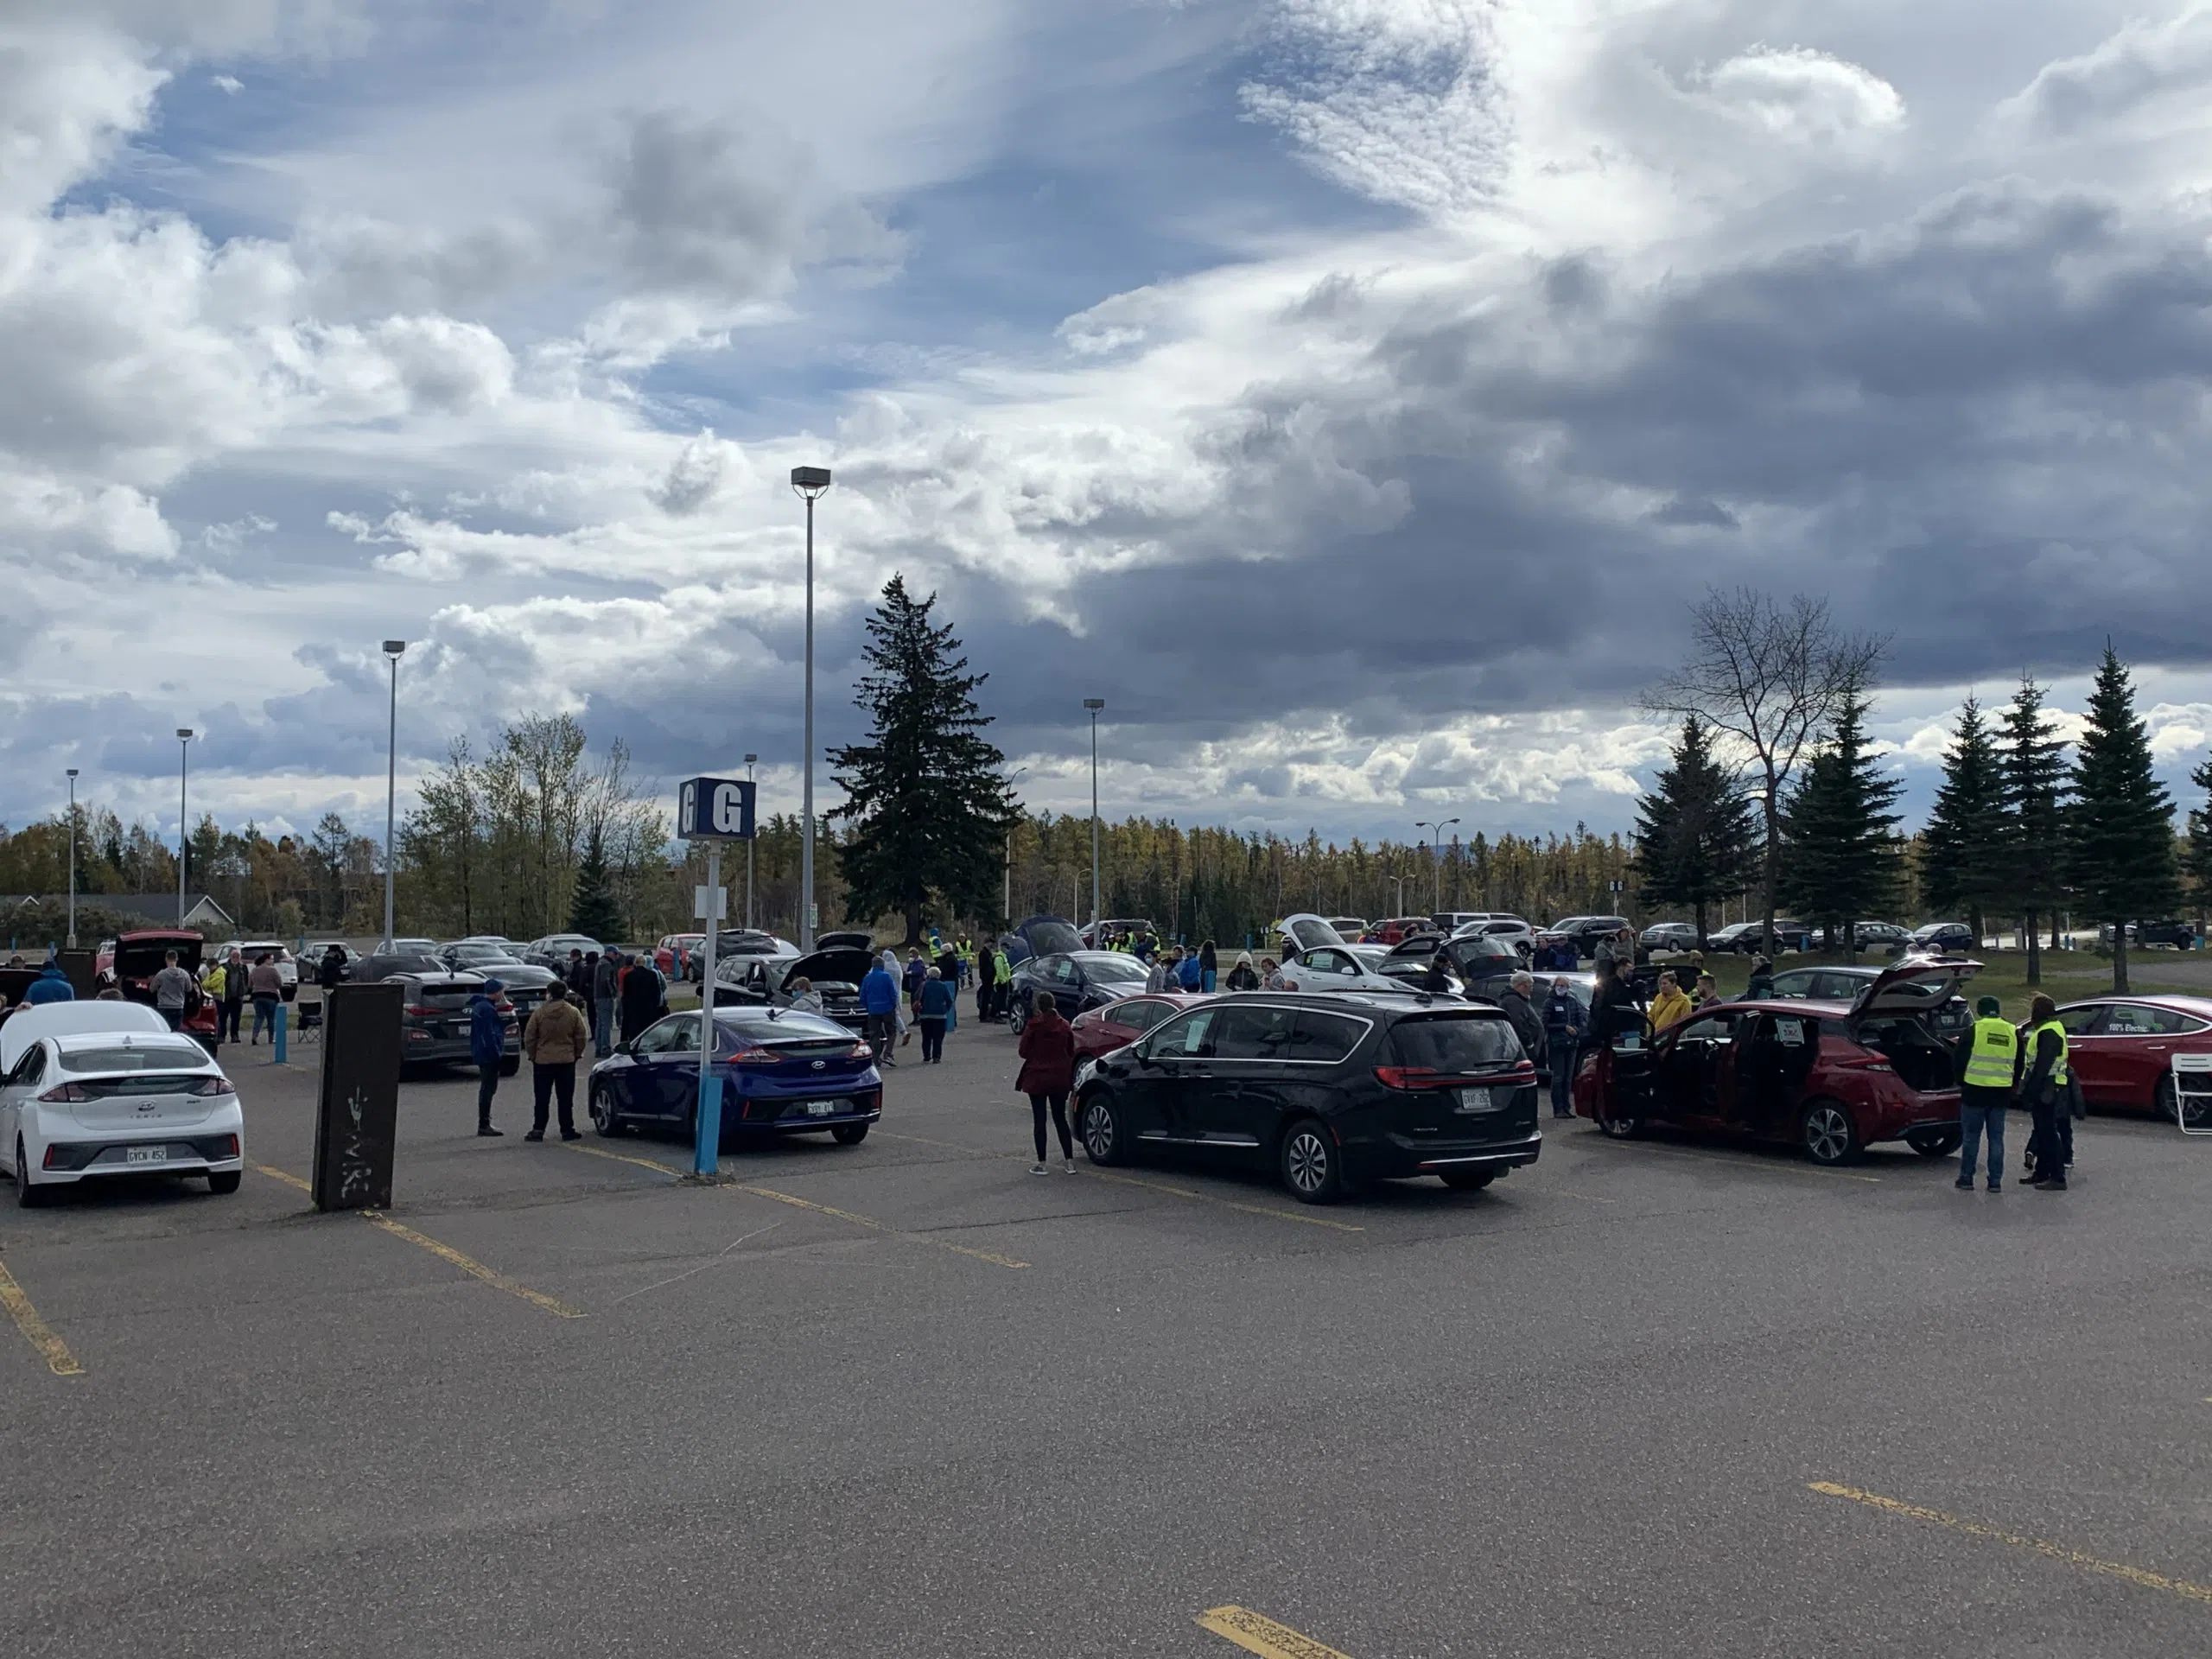 NW Ontario's First Electric Vehicle Show